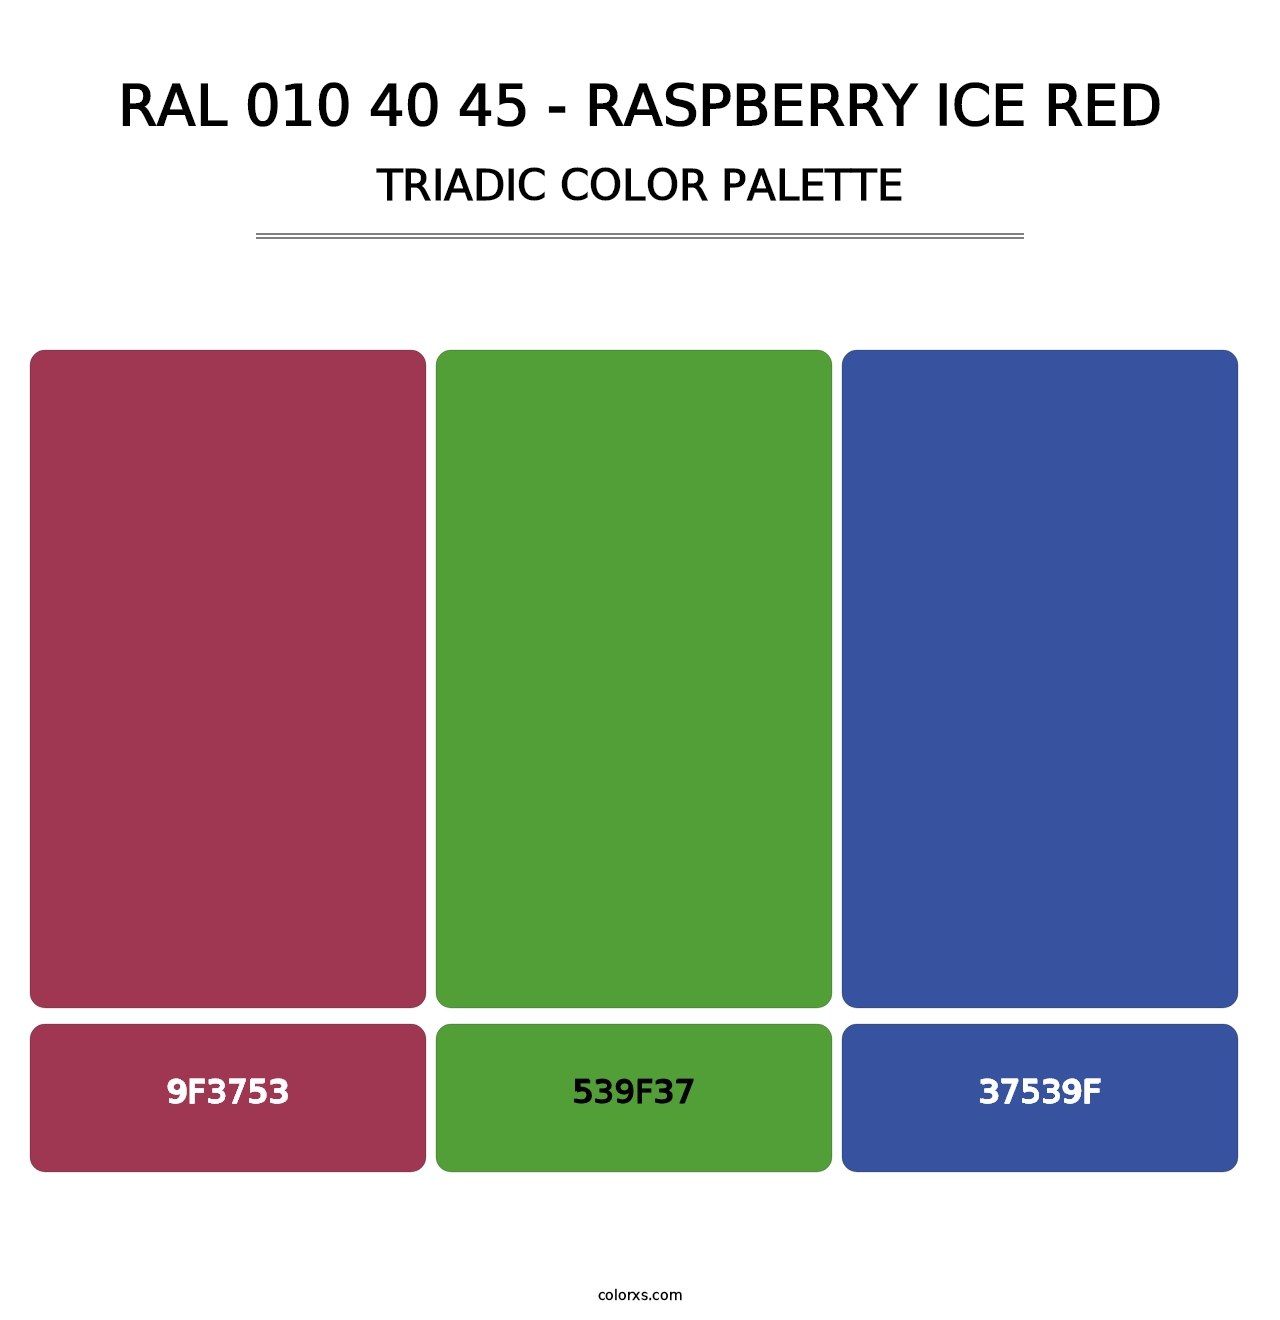 RAL 010 40 45 - Raspberry Ice Red - Triadic Color Palette